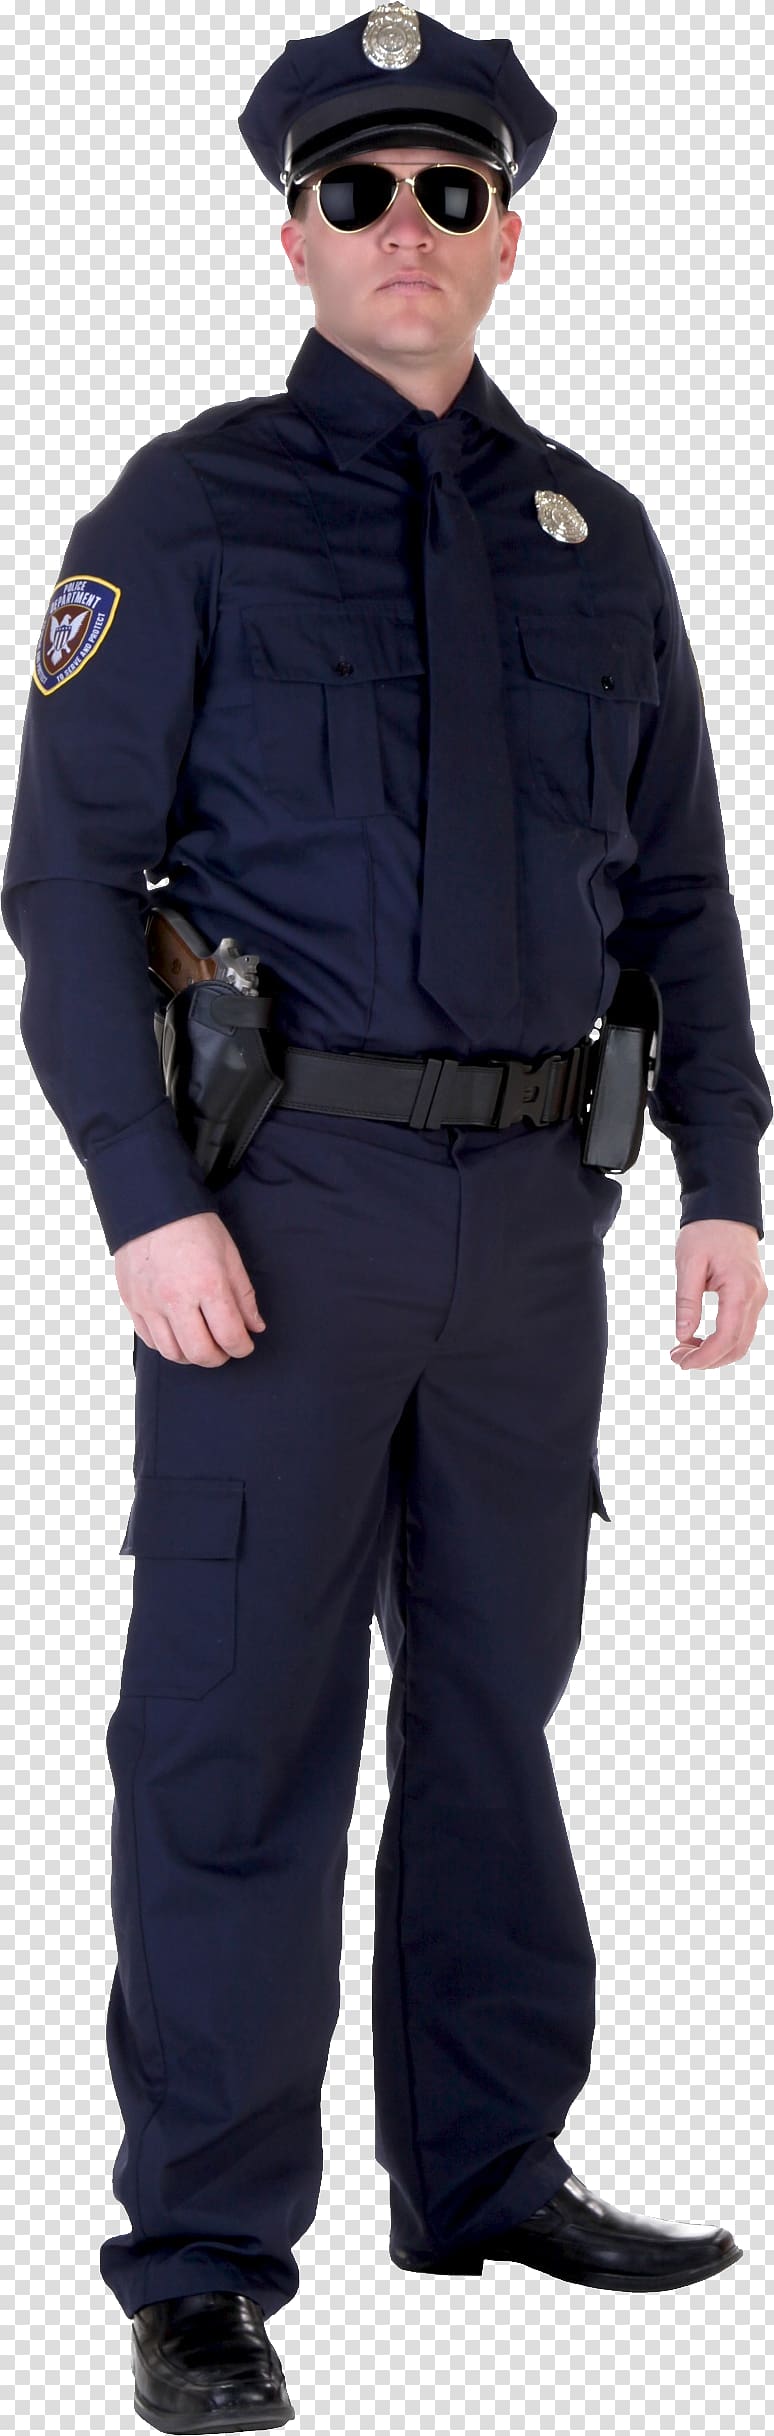 Policeman transparent background PNG clipart